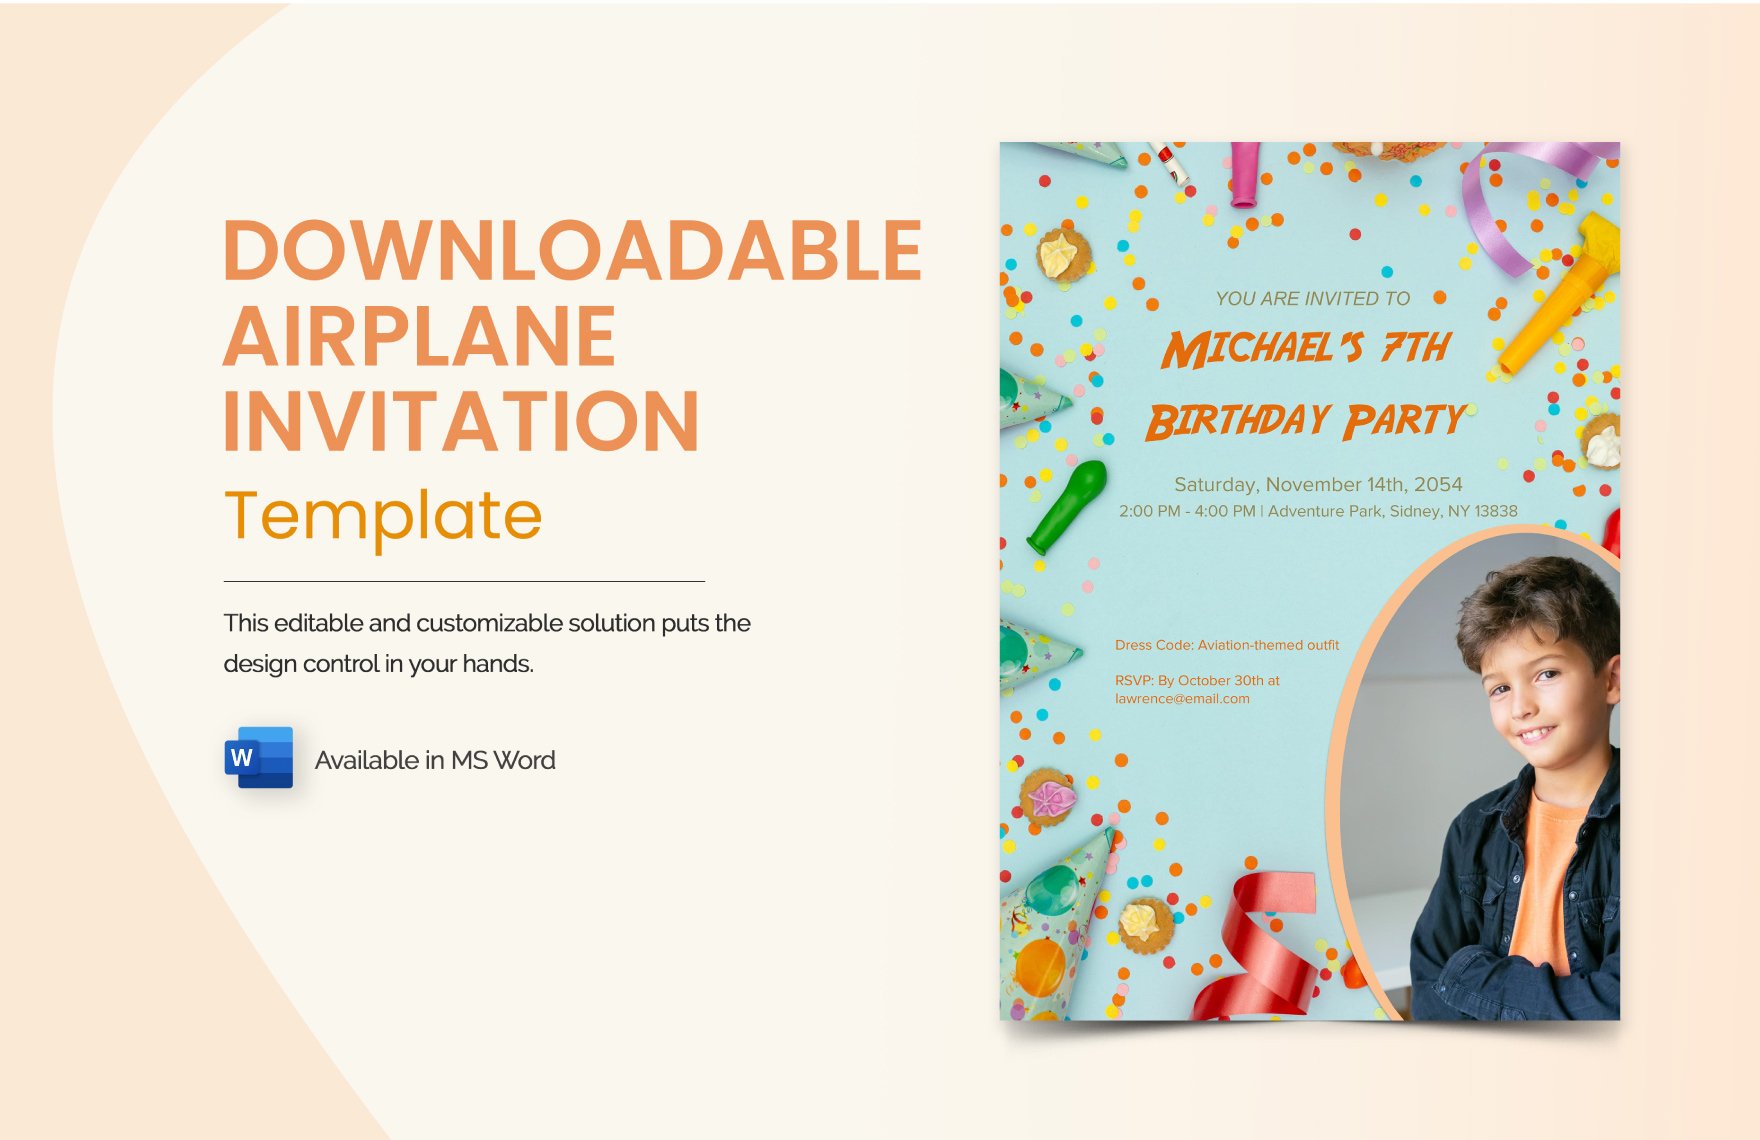 Free Downloadable Airplane Invitation Template